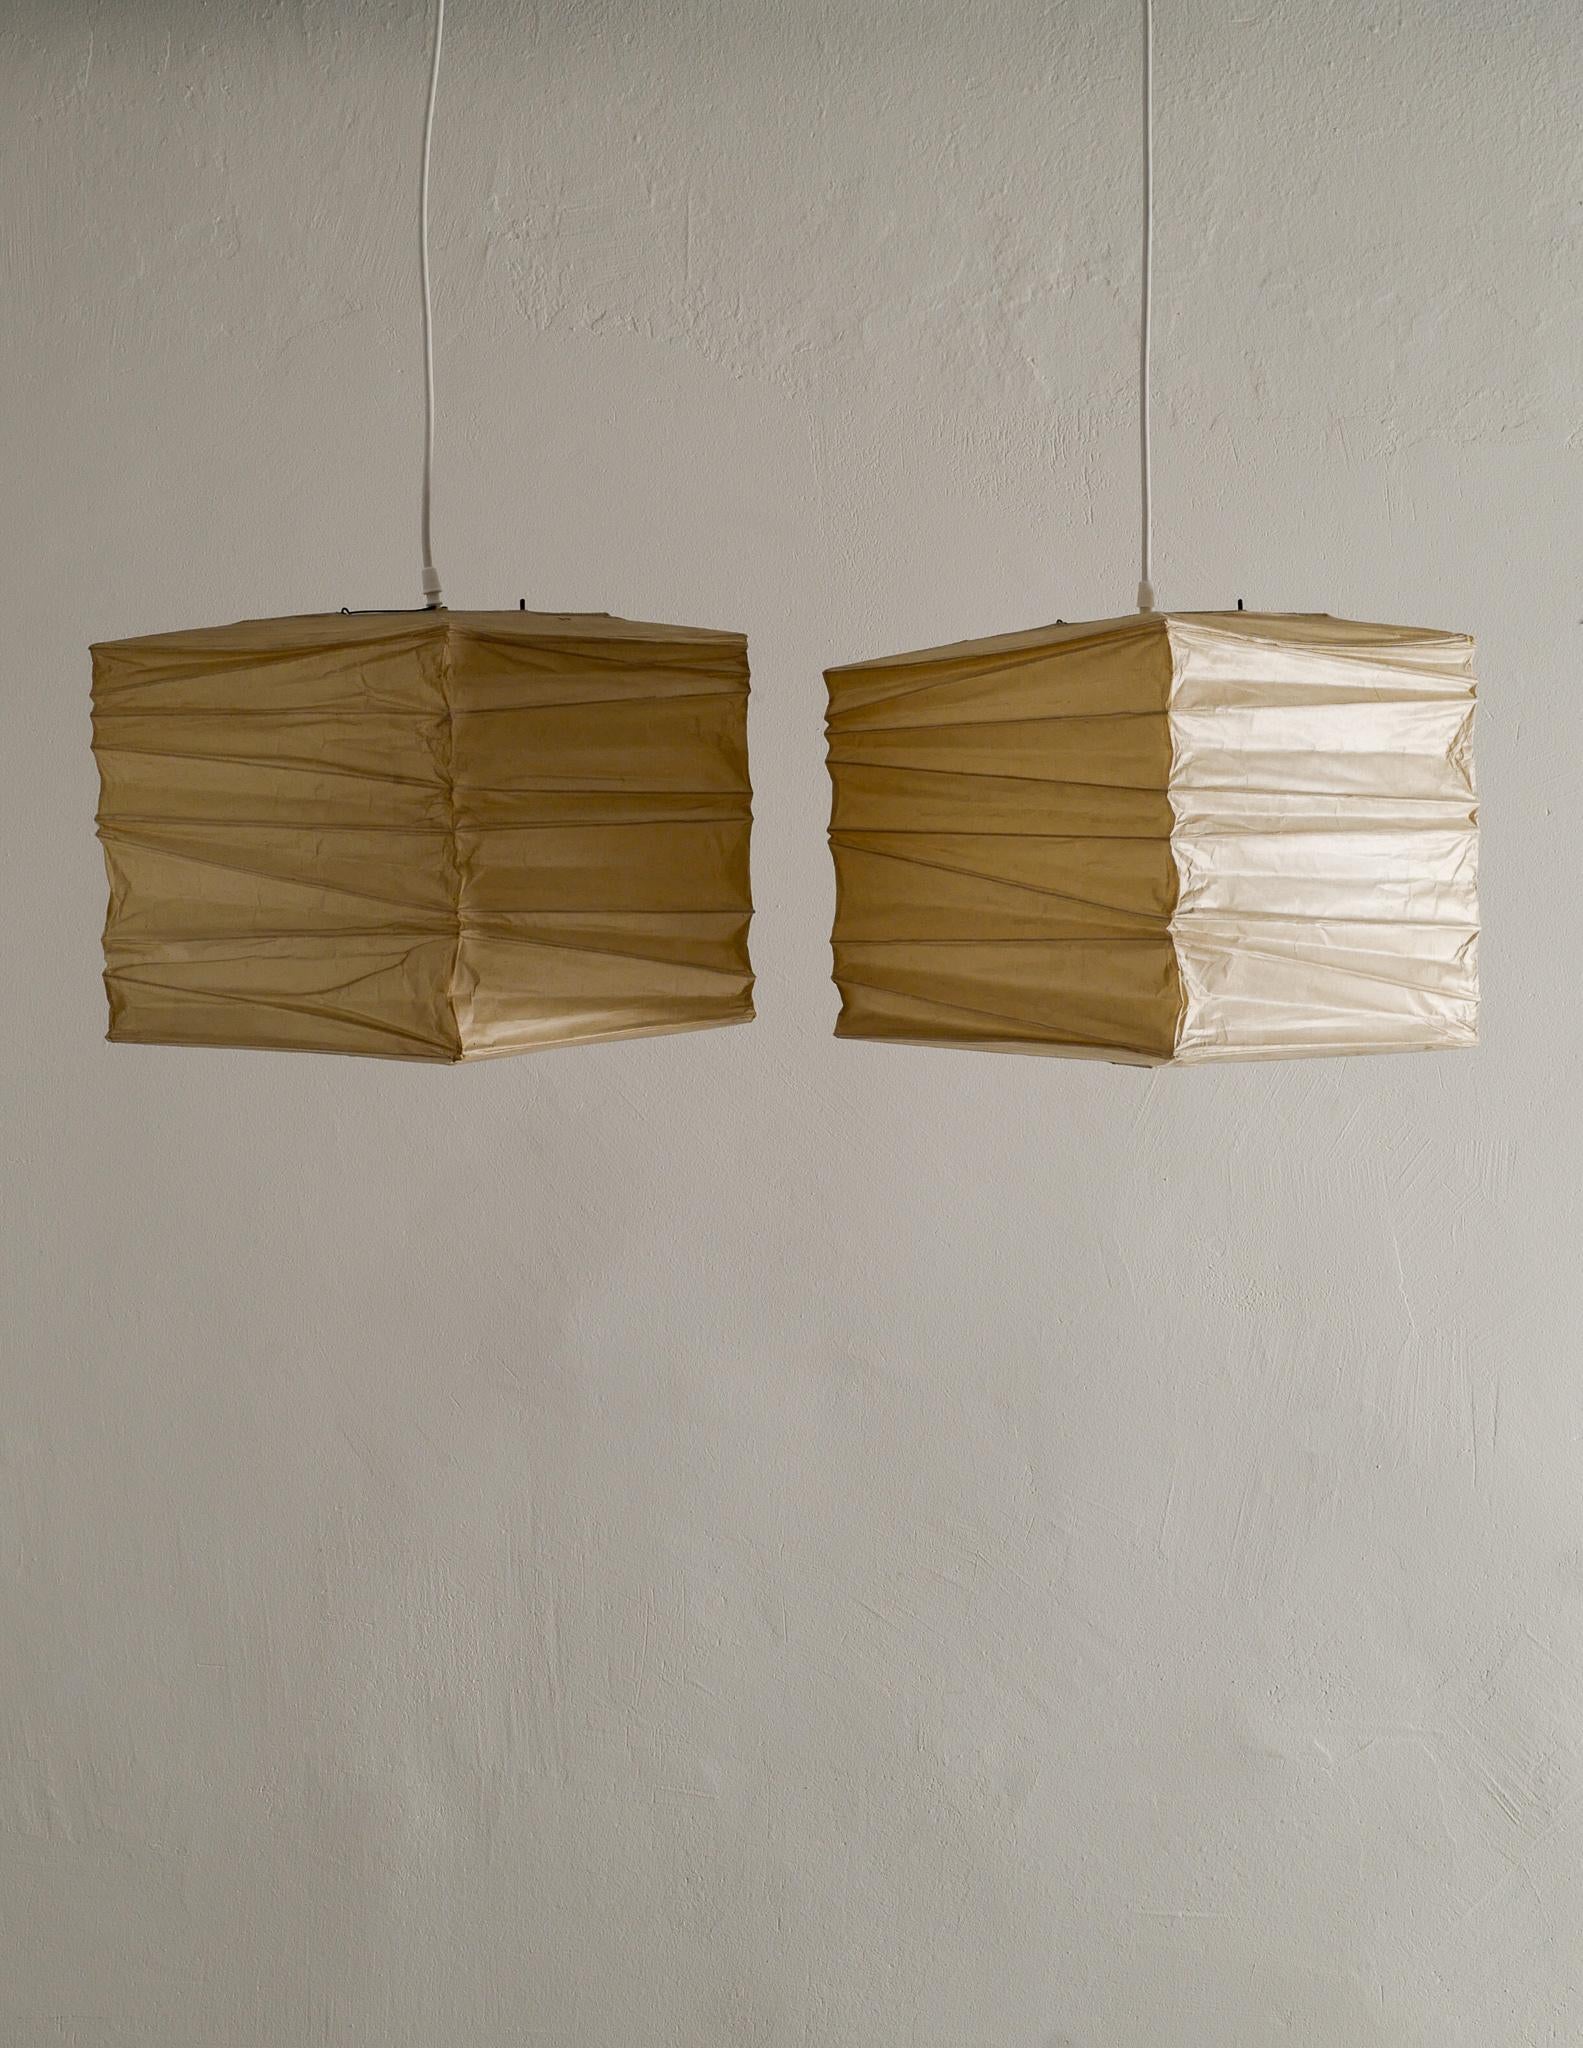 Rare trio of all original washi paper and bamboo pendants designed by Isamu Noguchi in 1971 and produced by Ozeki & Co., Ltd in the early 1970s. Two 